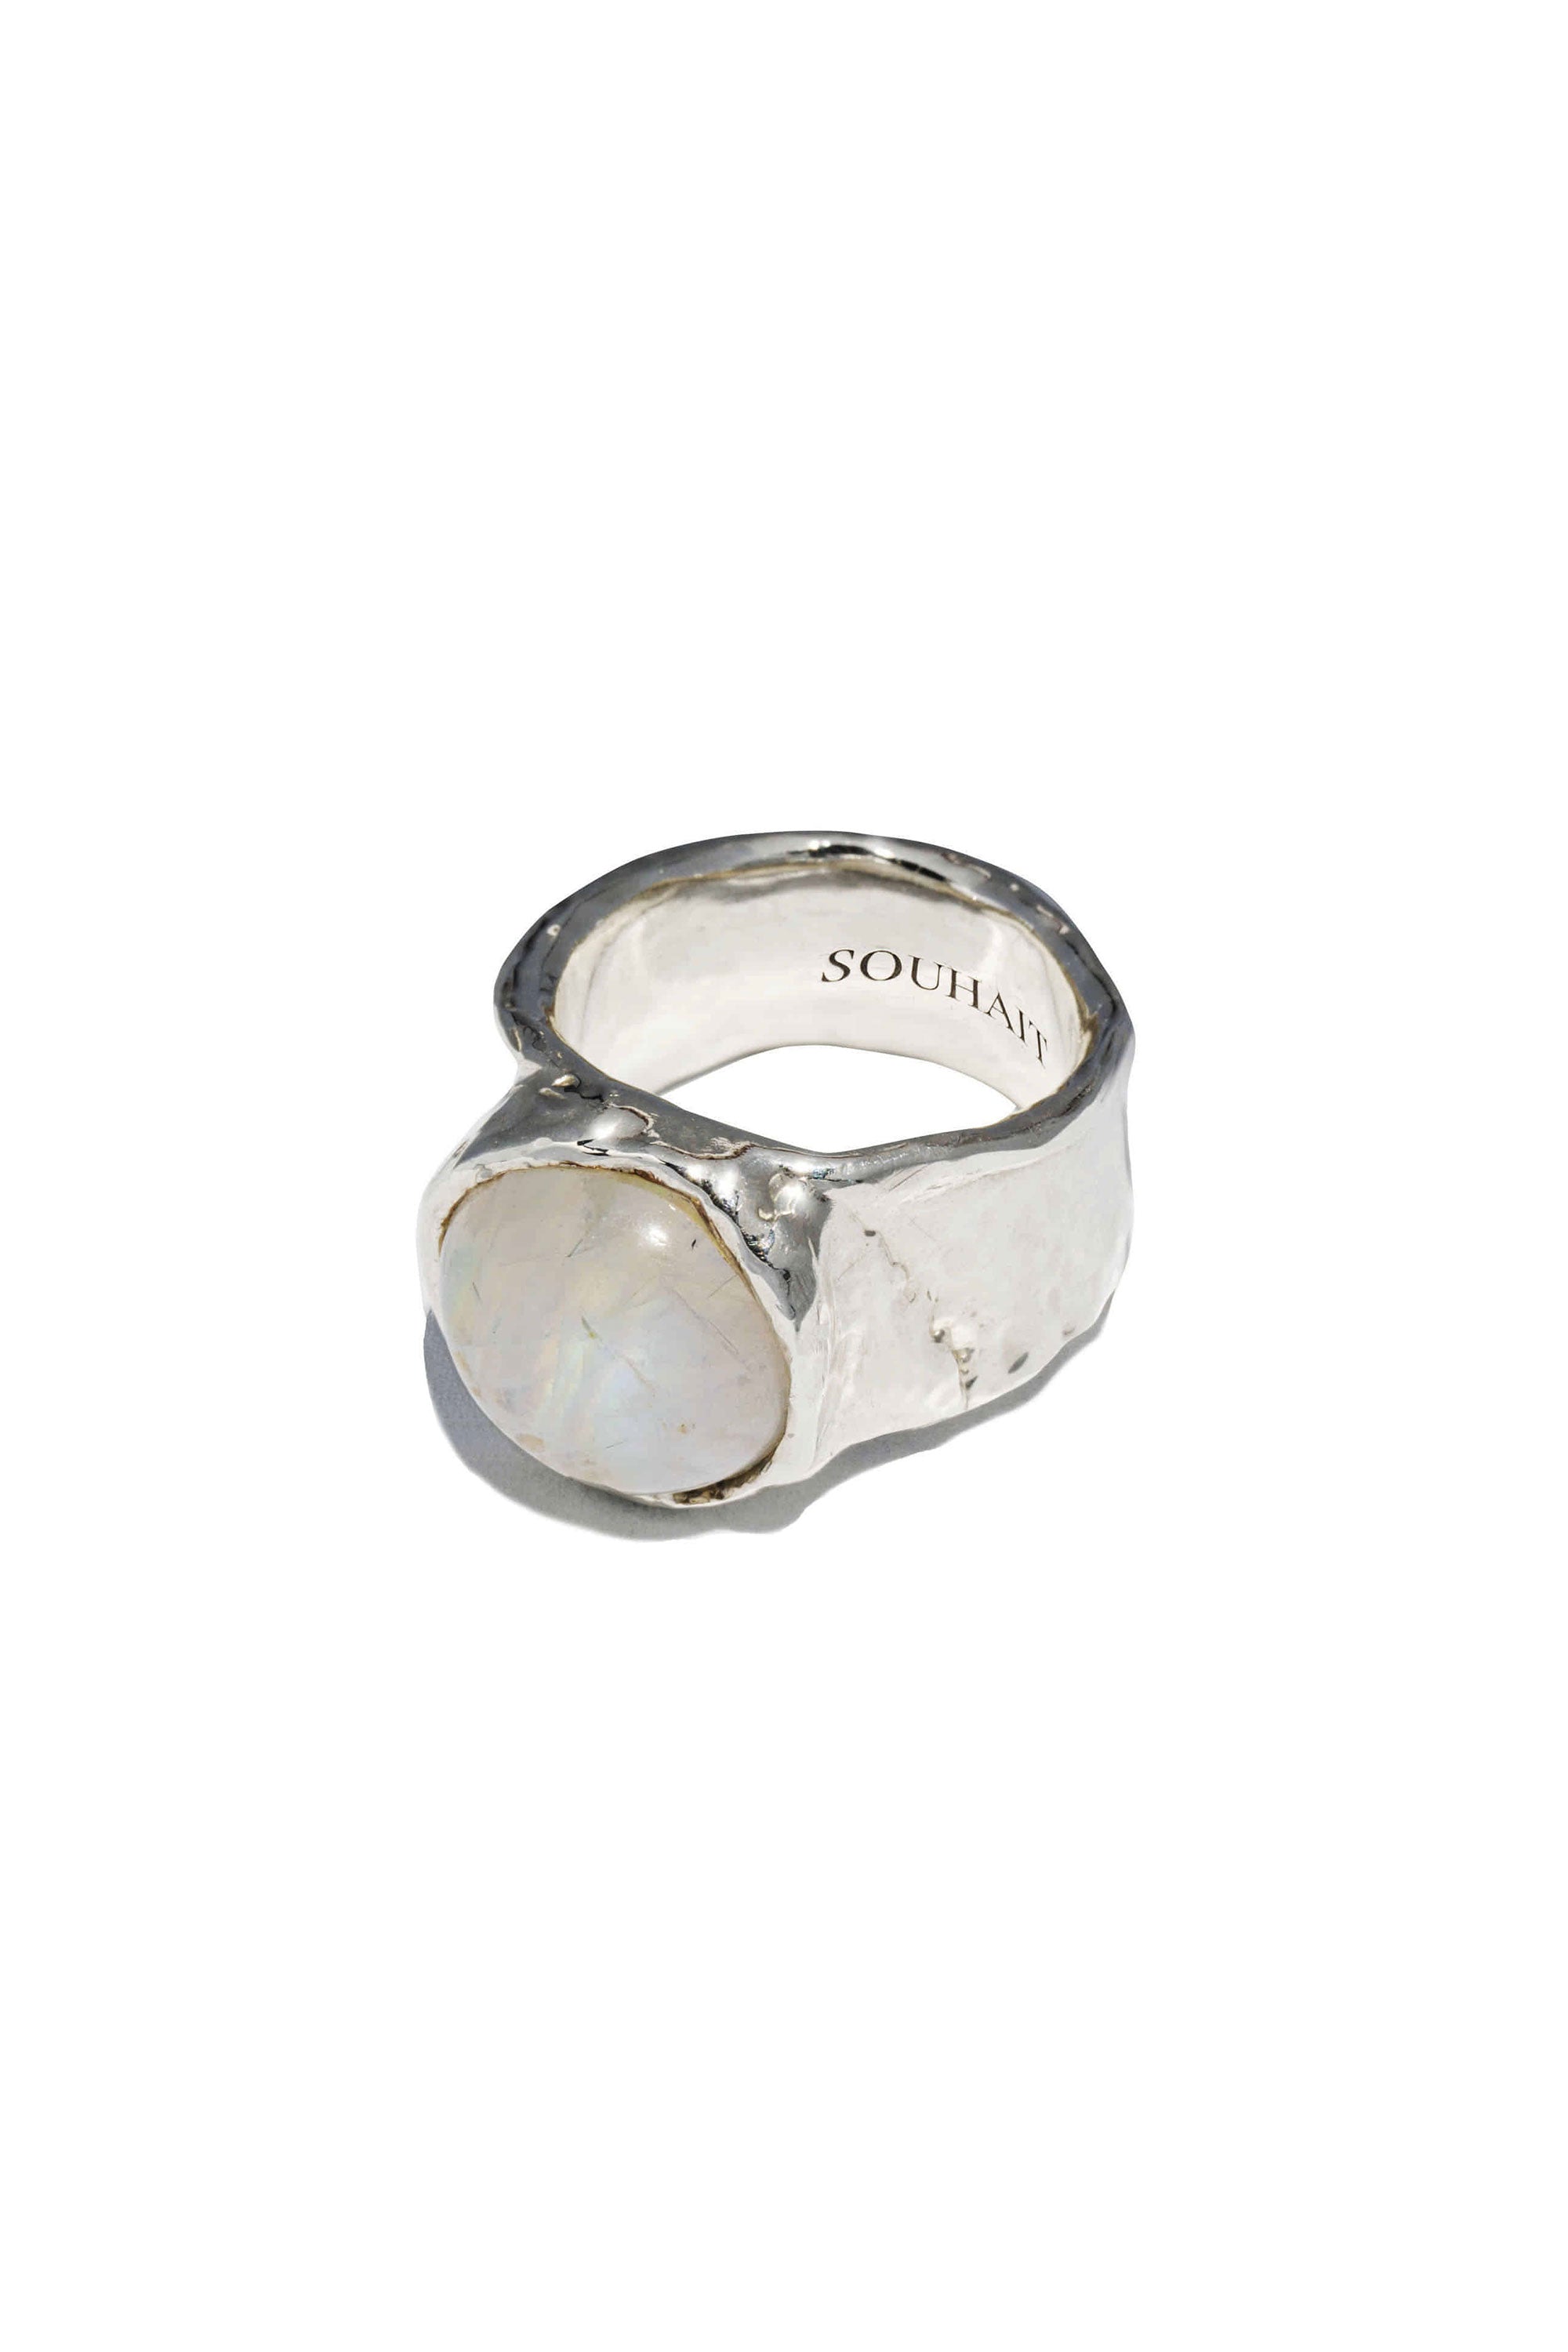 SOUHAIT SUMMER, NIGHT AND DREAM SUMMER MOON RING